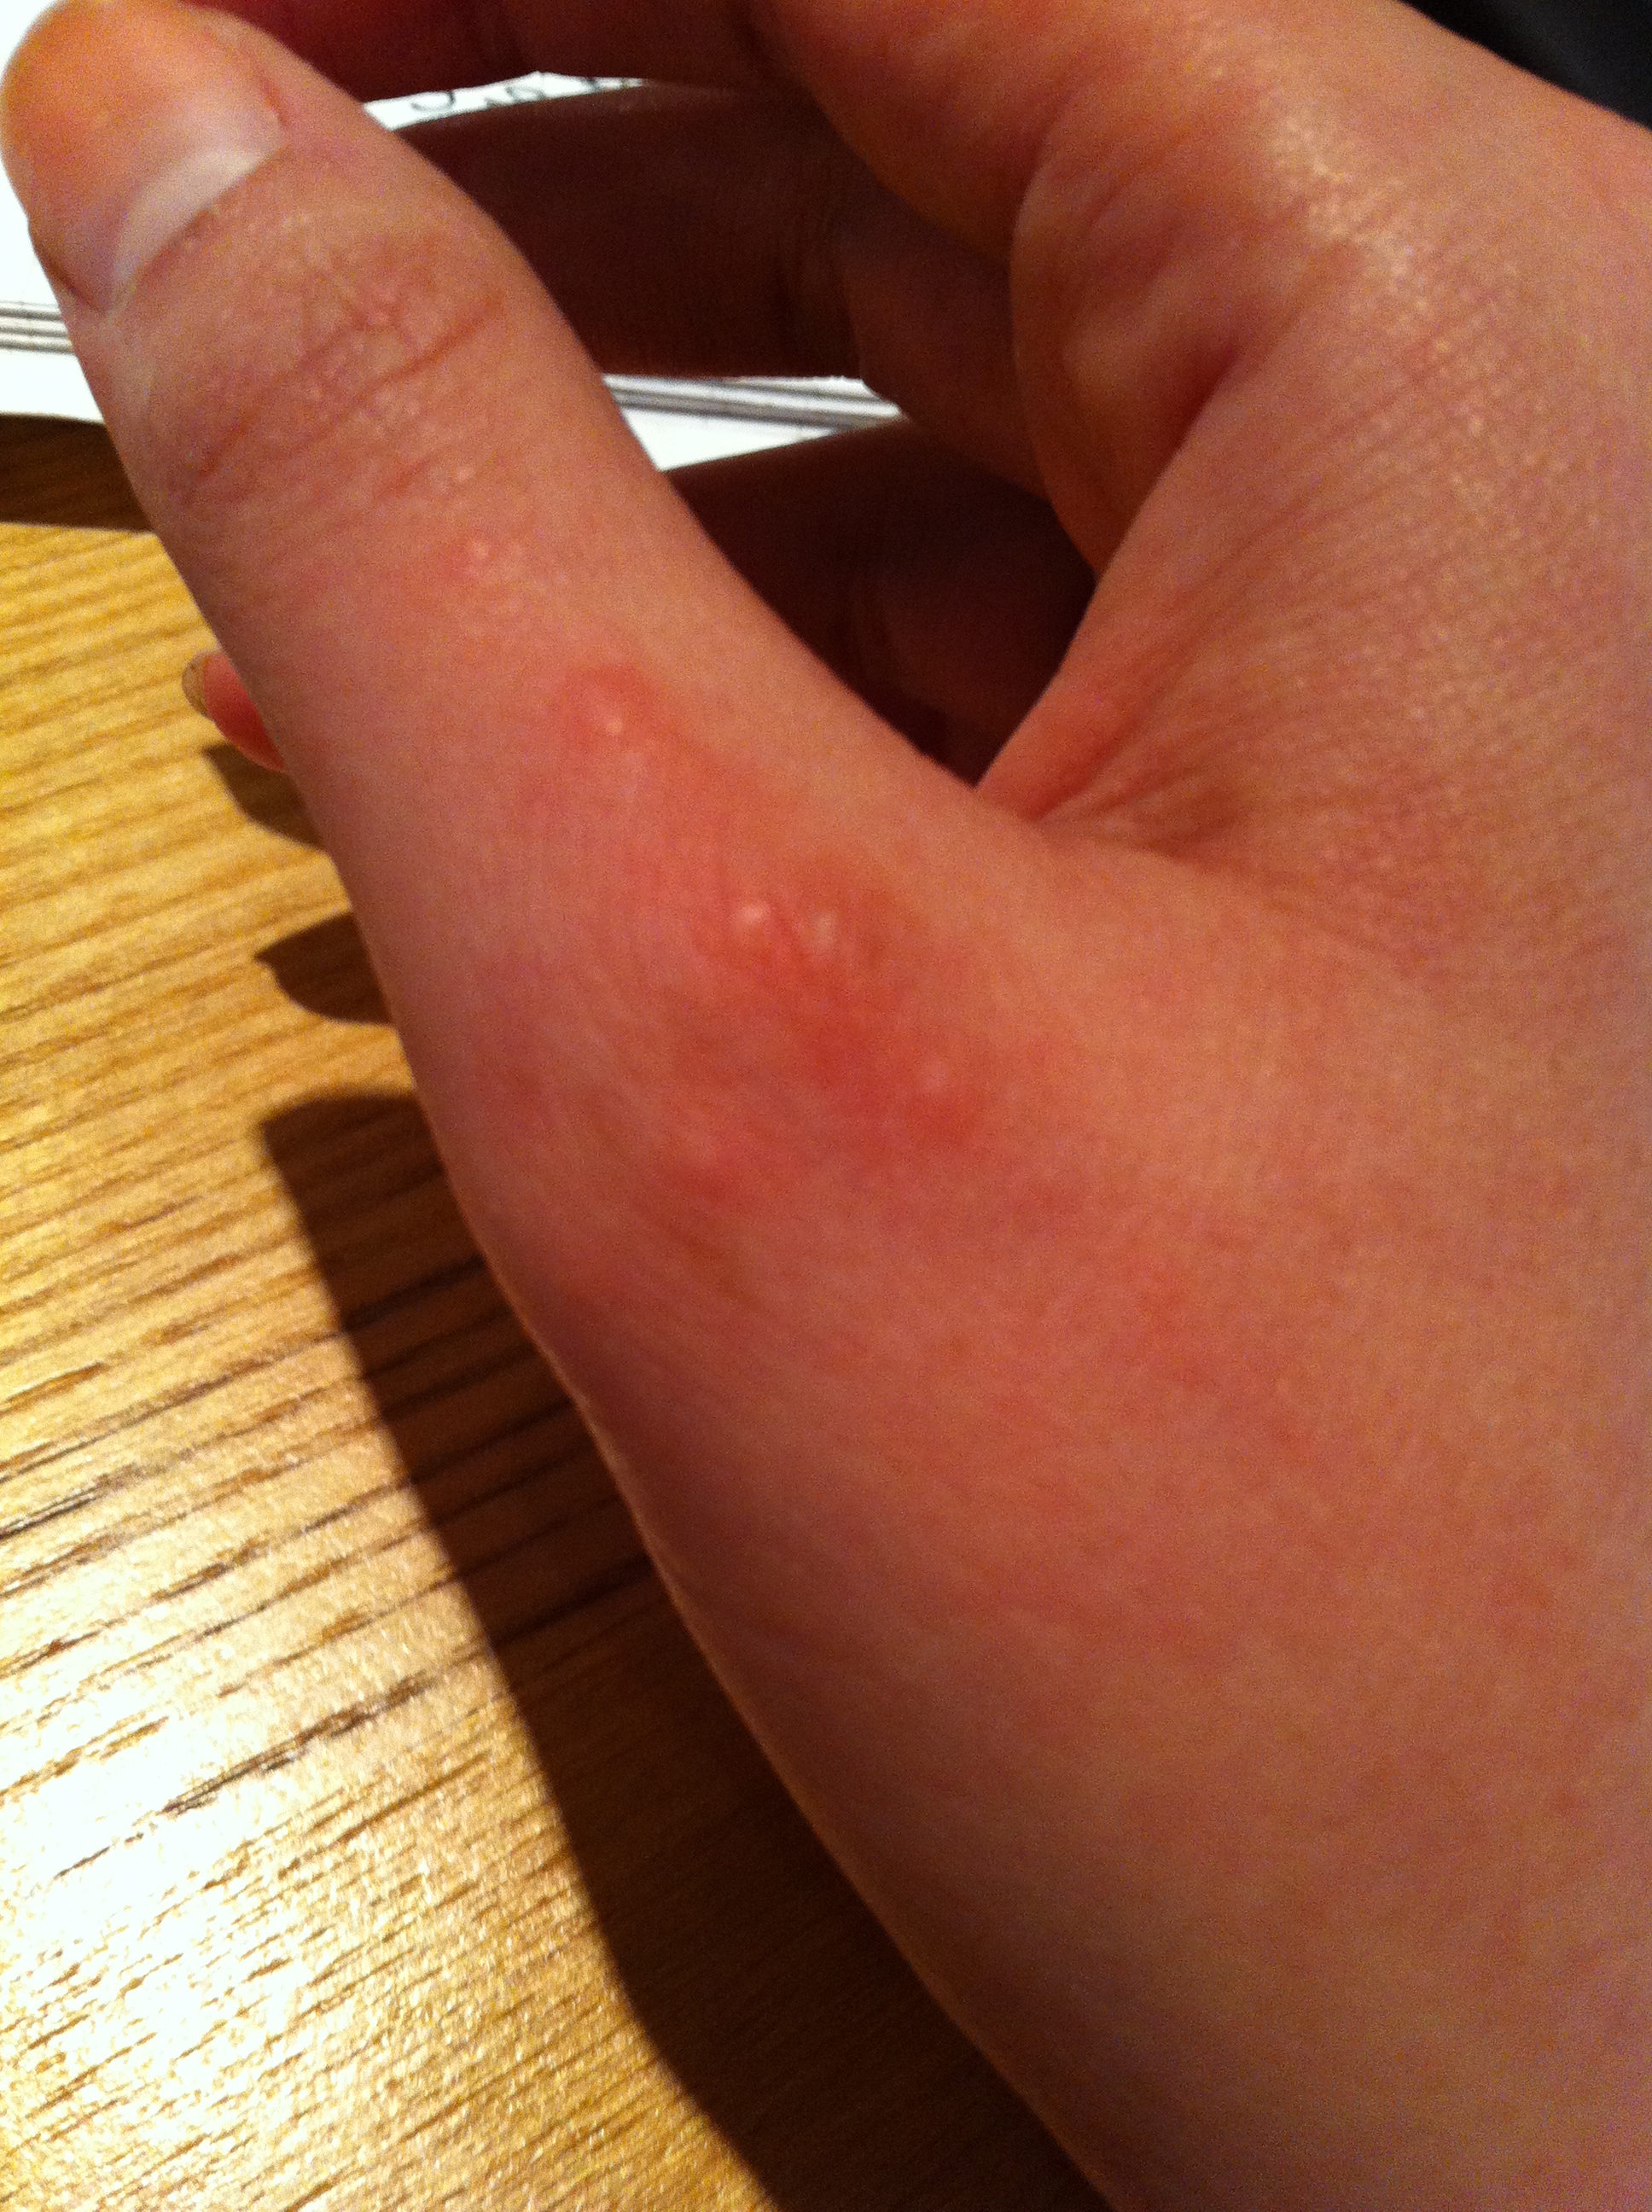 clear blisters on hands - Dermatology - MedHelp